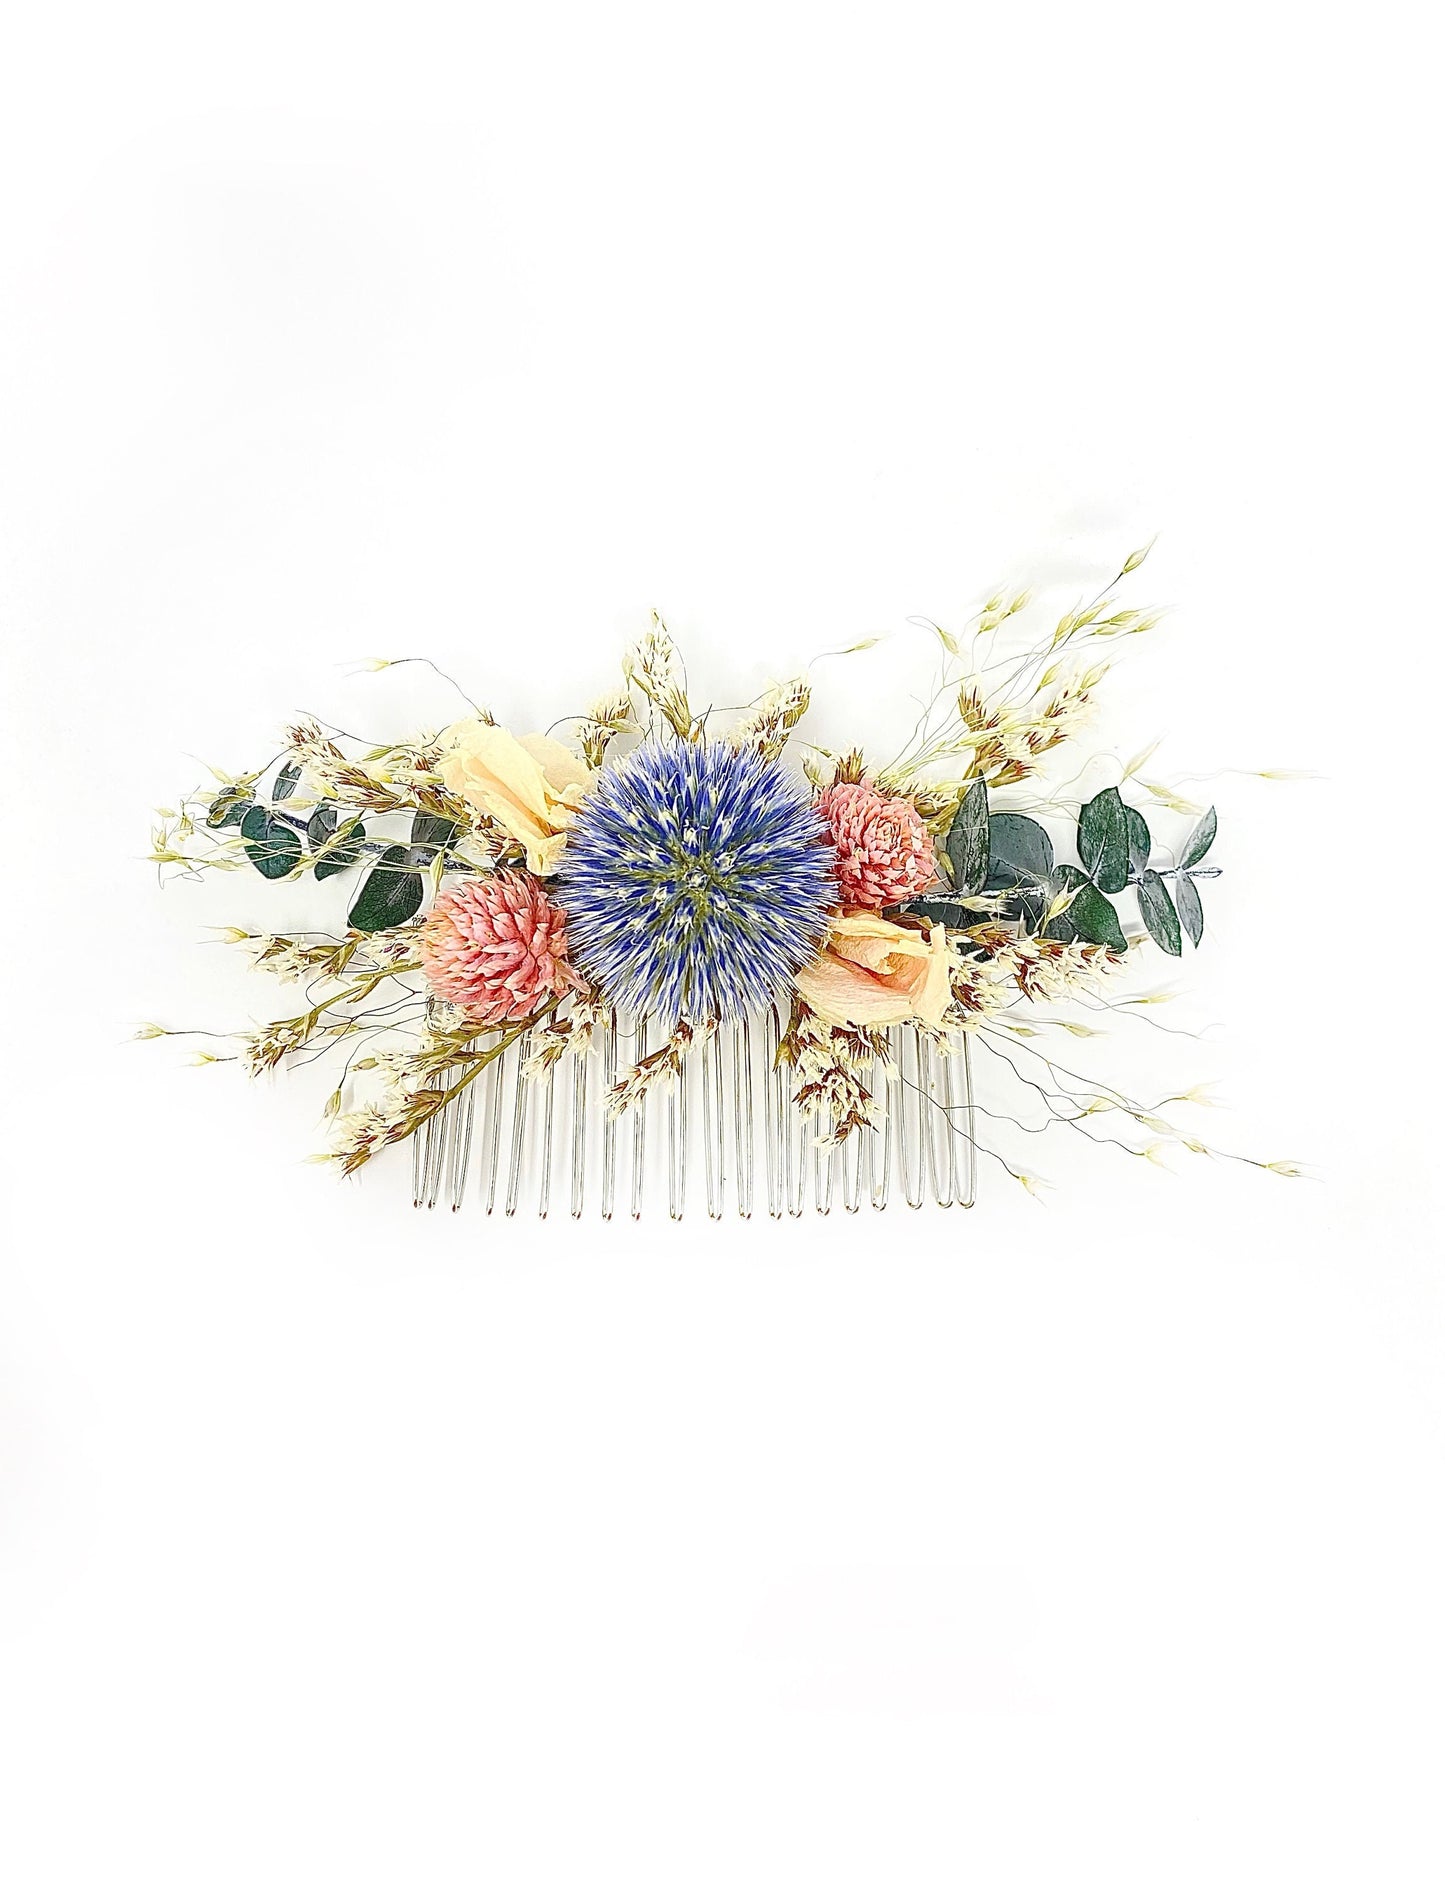 Hair Comb, Dried flowers, Preserved flowers, Floral comb, Hair accessories, Wedding accessory, Globe thistles, Winter, Pink and Blue, Peony